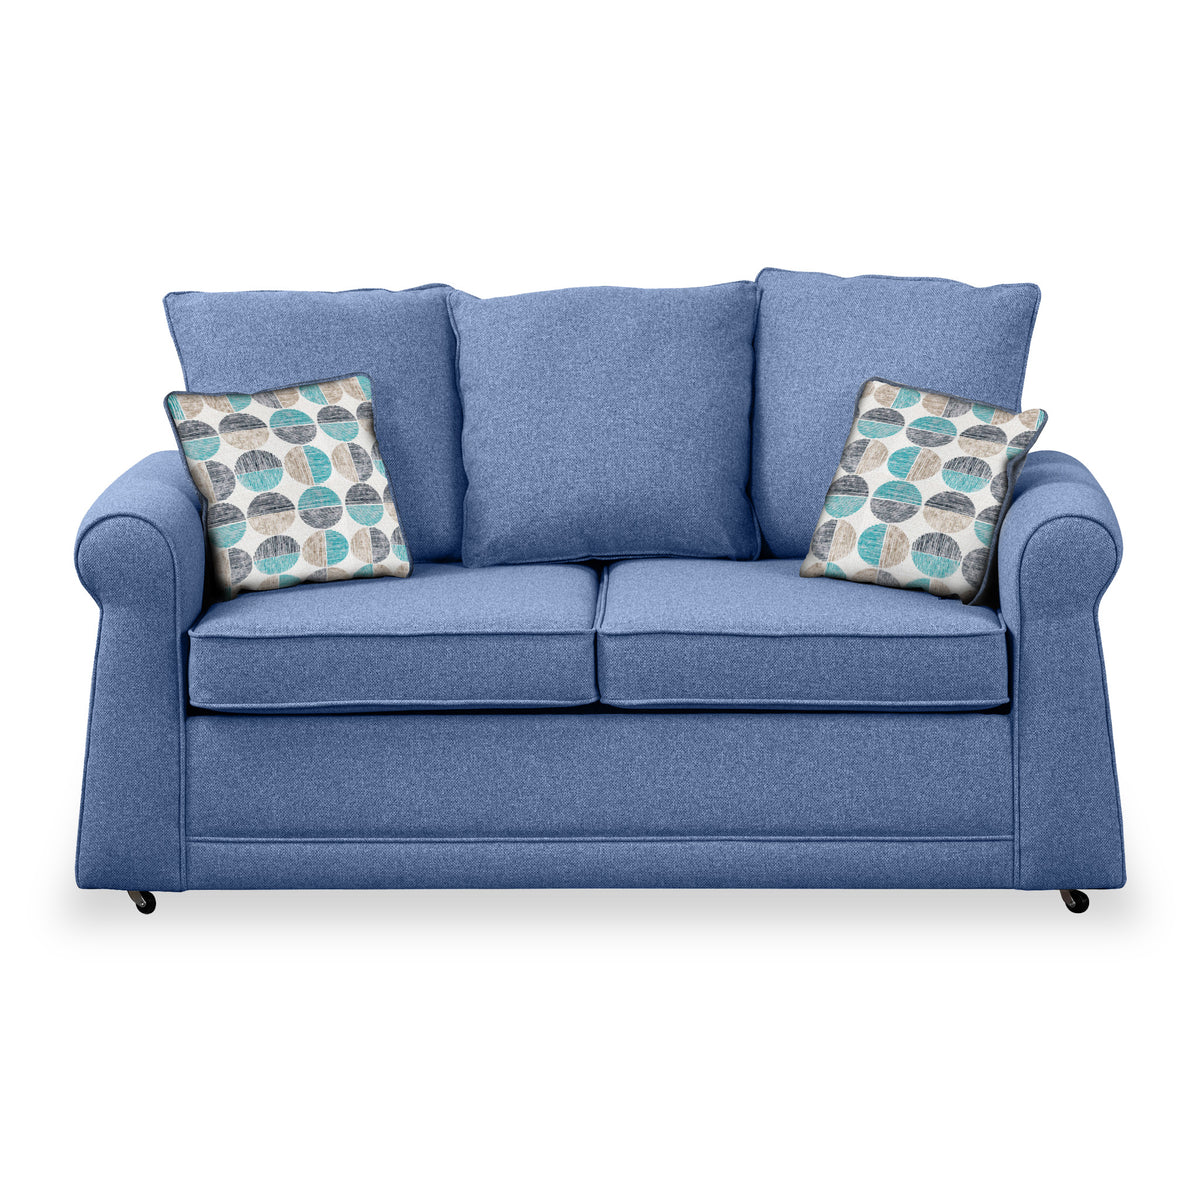 Broughton Denim Faux Linen 2 Seater Sofabed with Duck Egg Scatter Cushions from Roseland Furniture